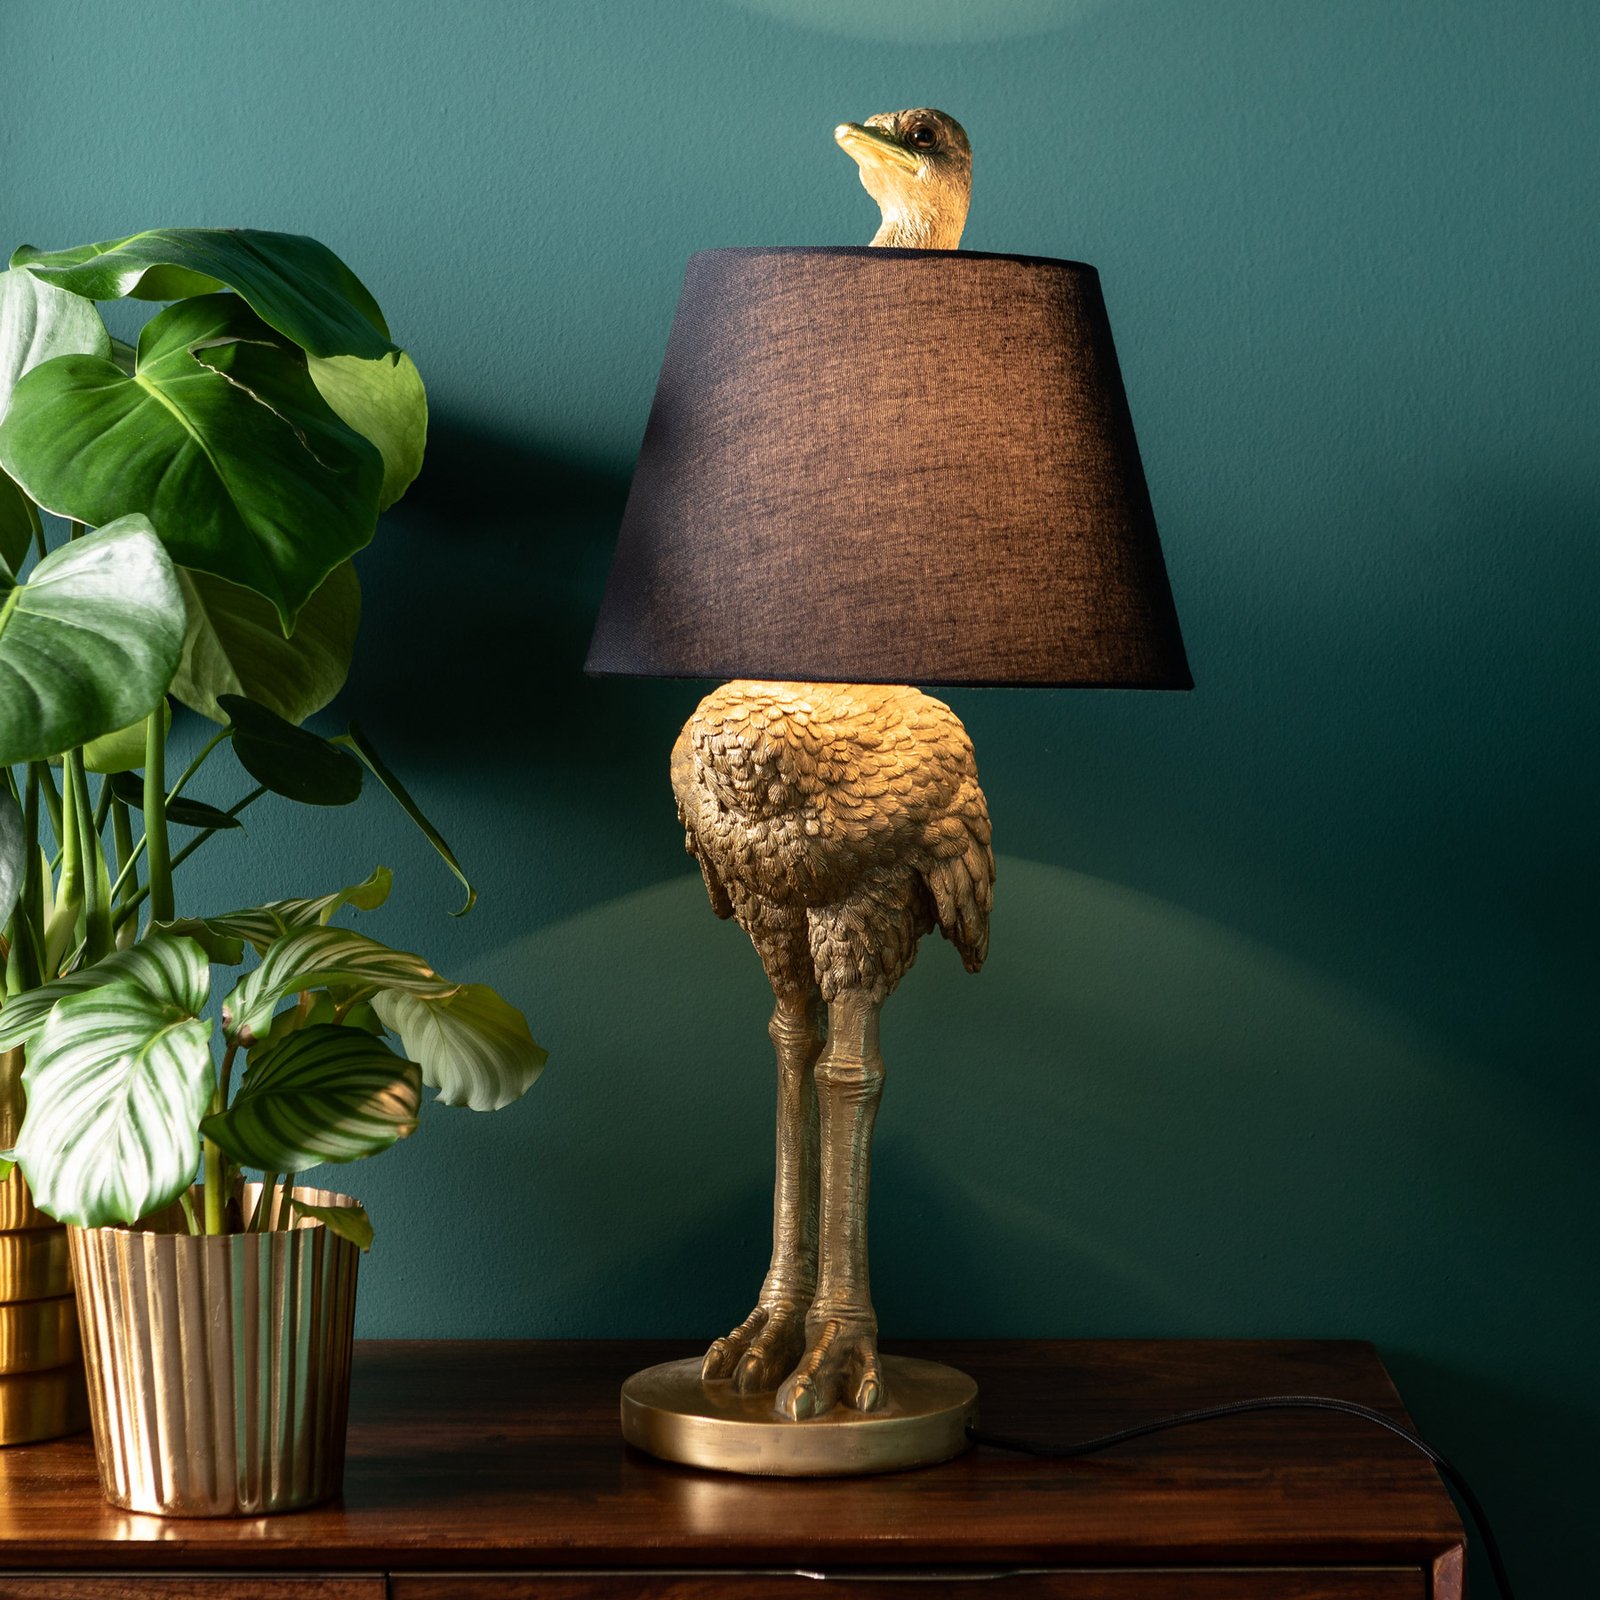 KARE Animal Ostrich table lamp with ostrich figure 